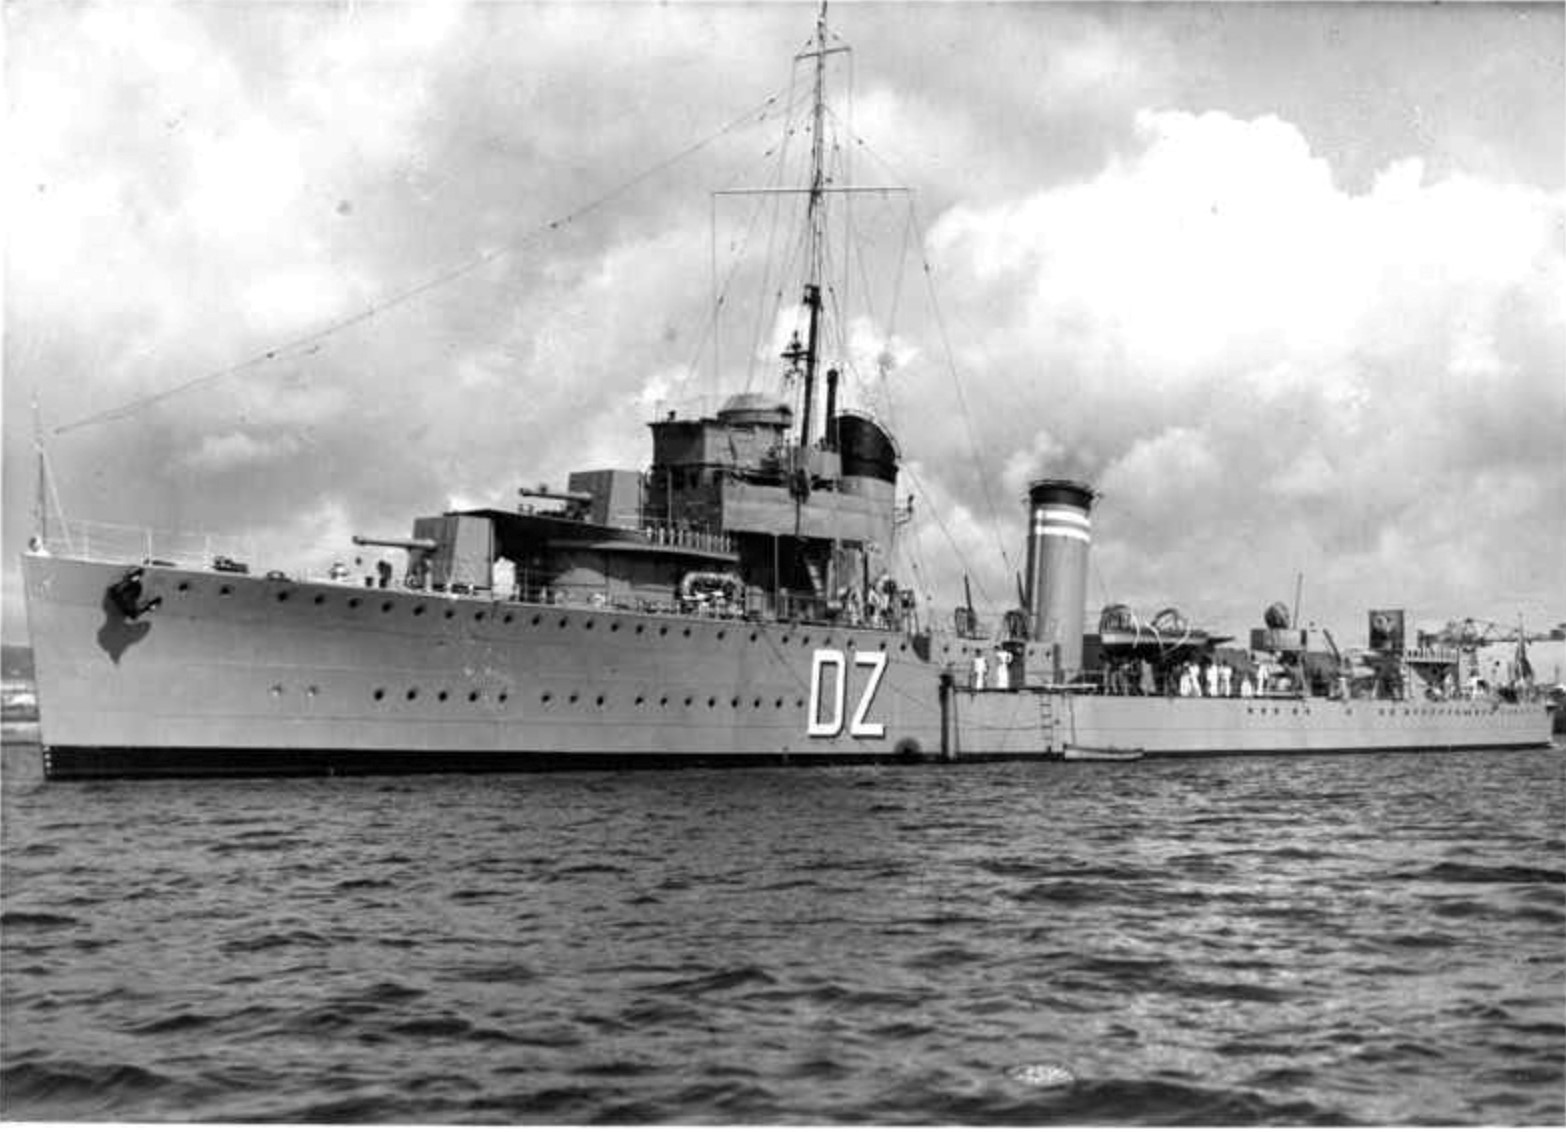 n The Jose Luis Diez, the Spanish destroyer which landed in Falmouth causing a mass desertion